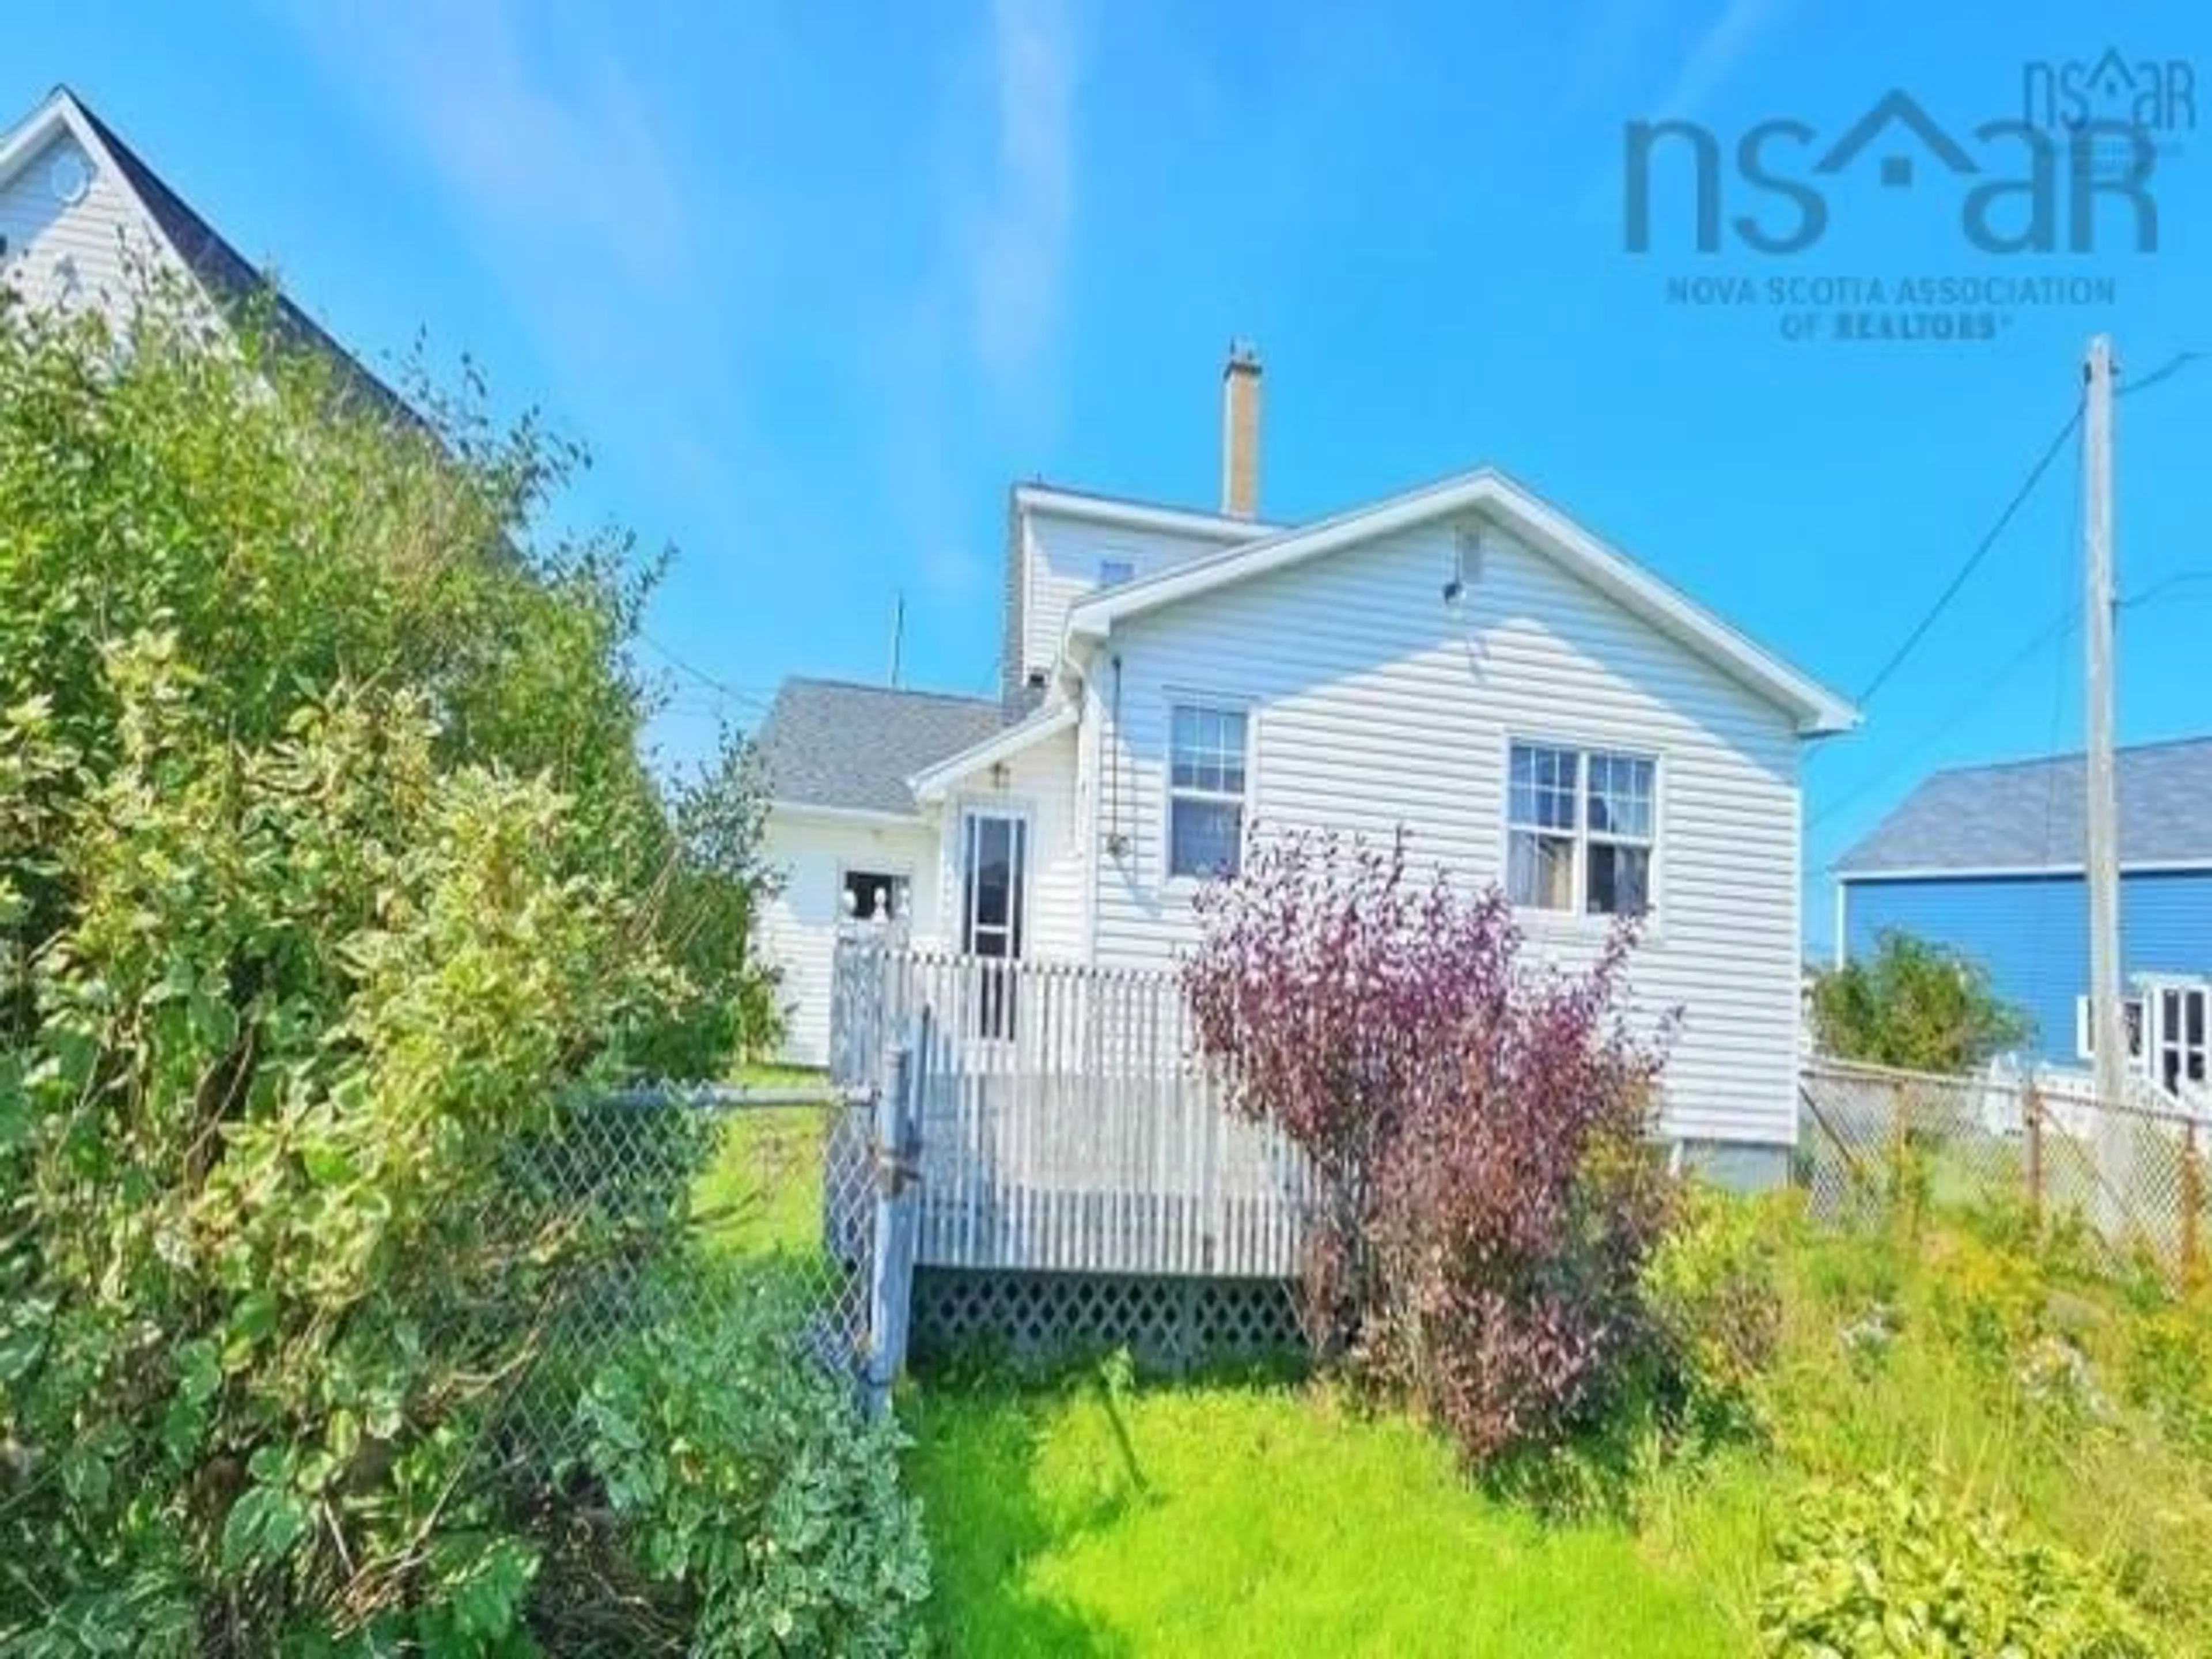 Cottage for 236 Wallace Rd, Glace Bay Nova Scotia B1A 4P4